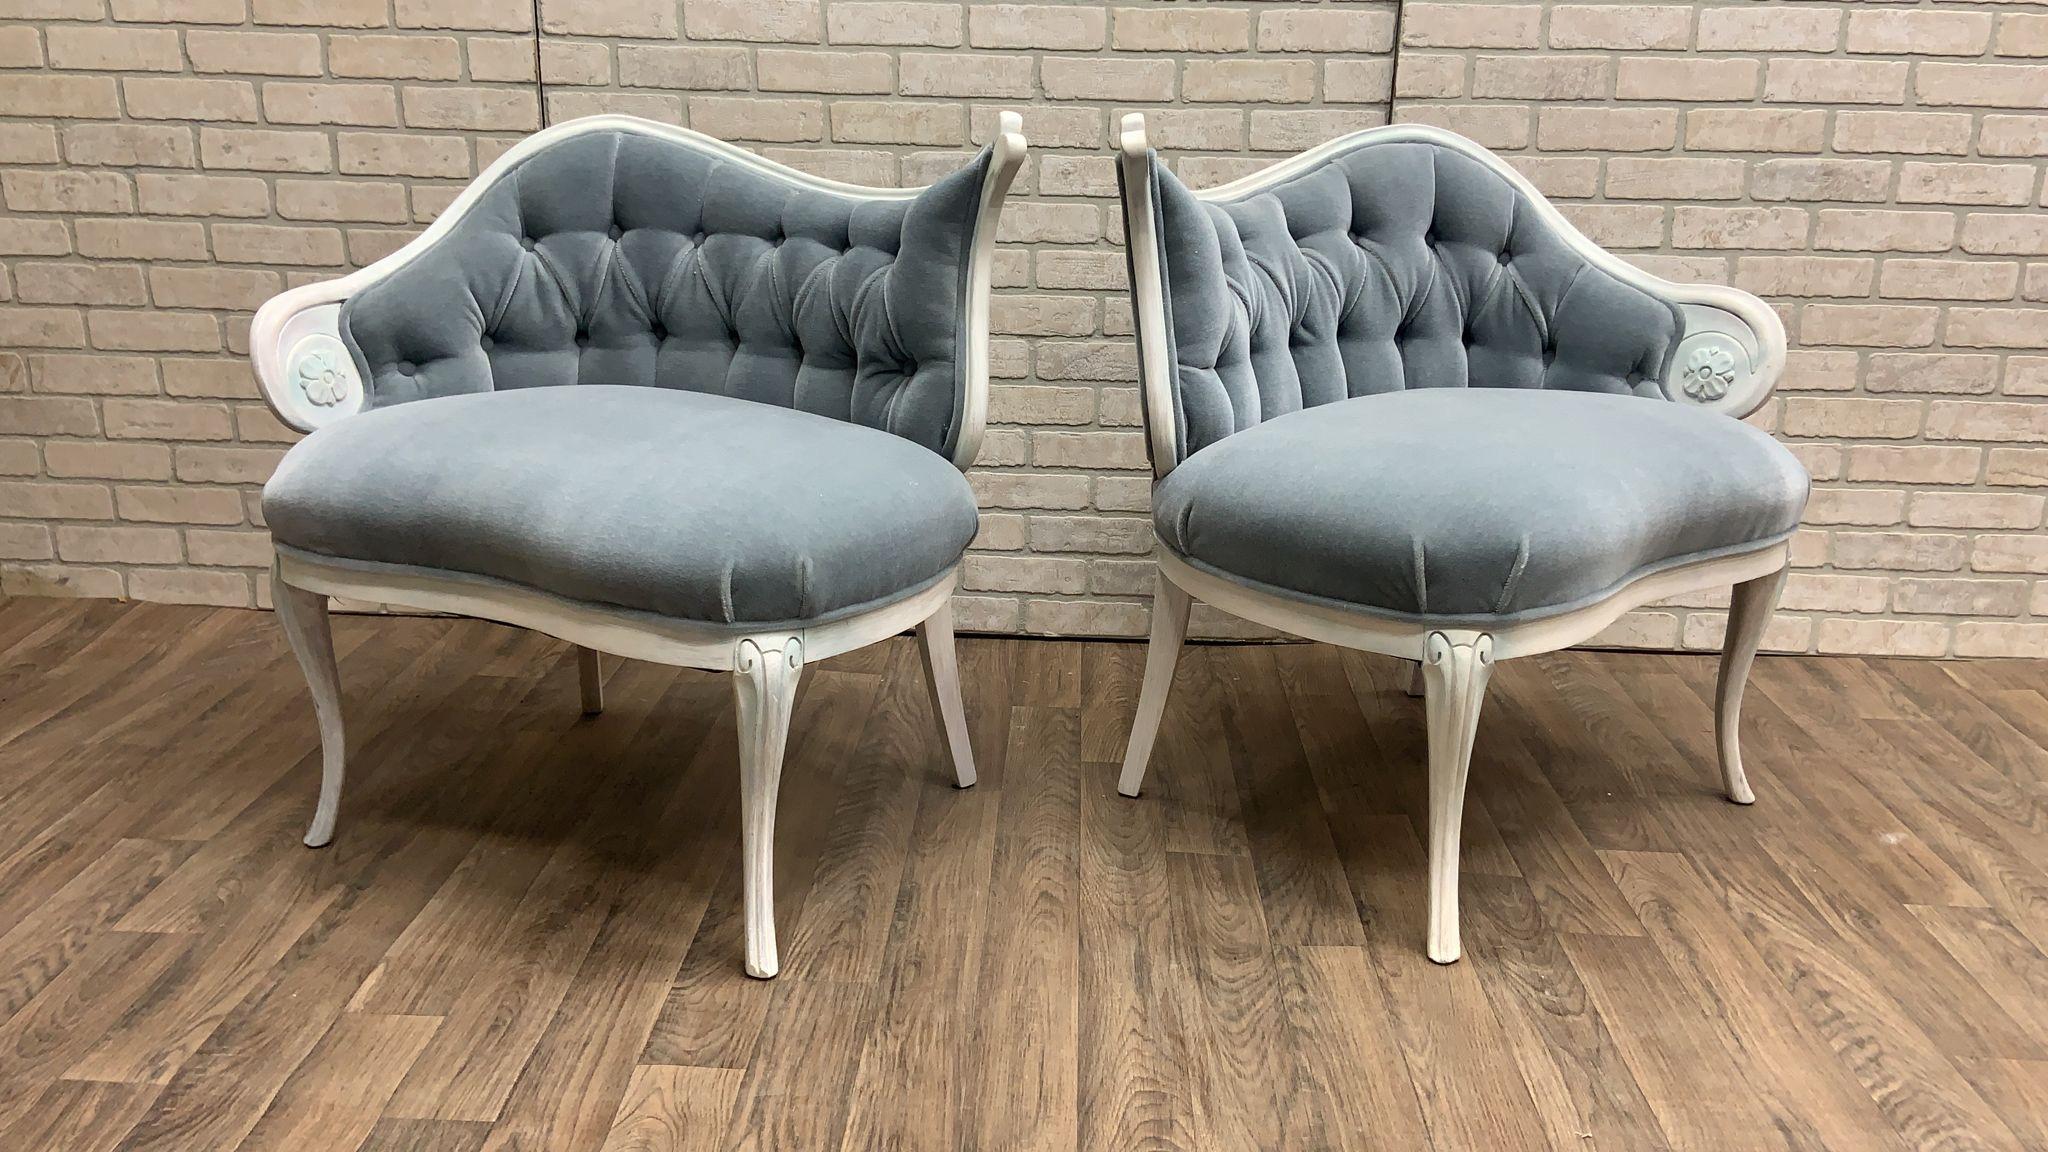 Vintage French Rococo Style Asymmetrical Fireside Ice Blue Mohair Chairs - Pair For Sale 2